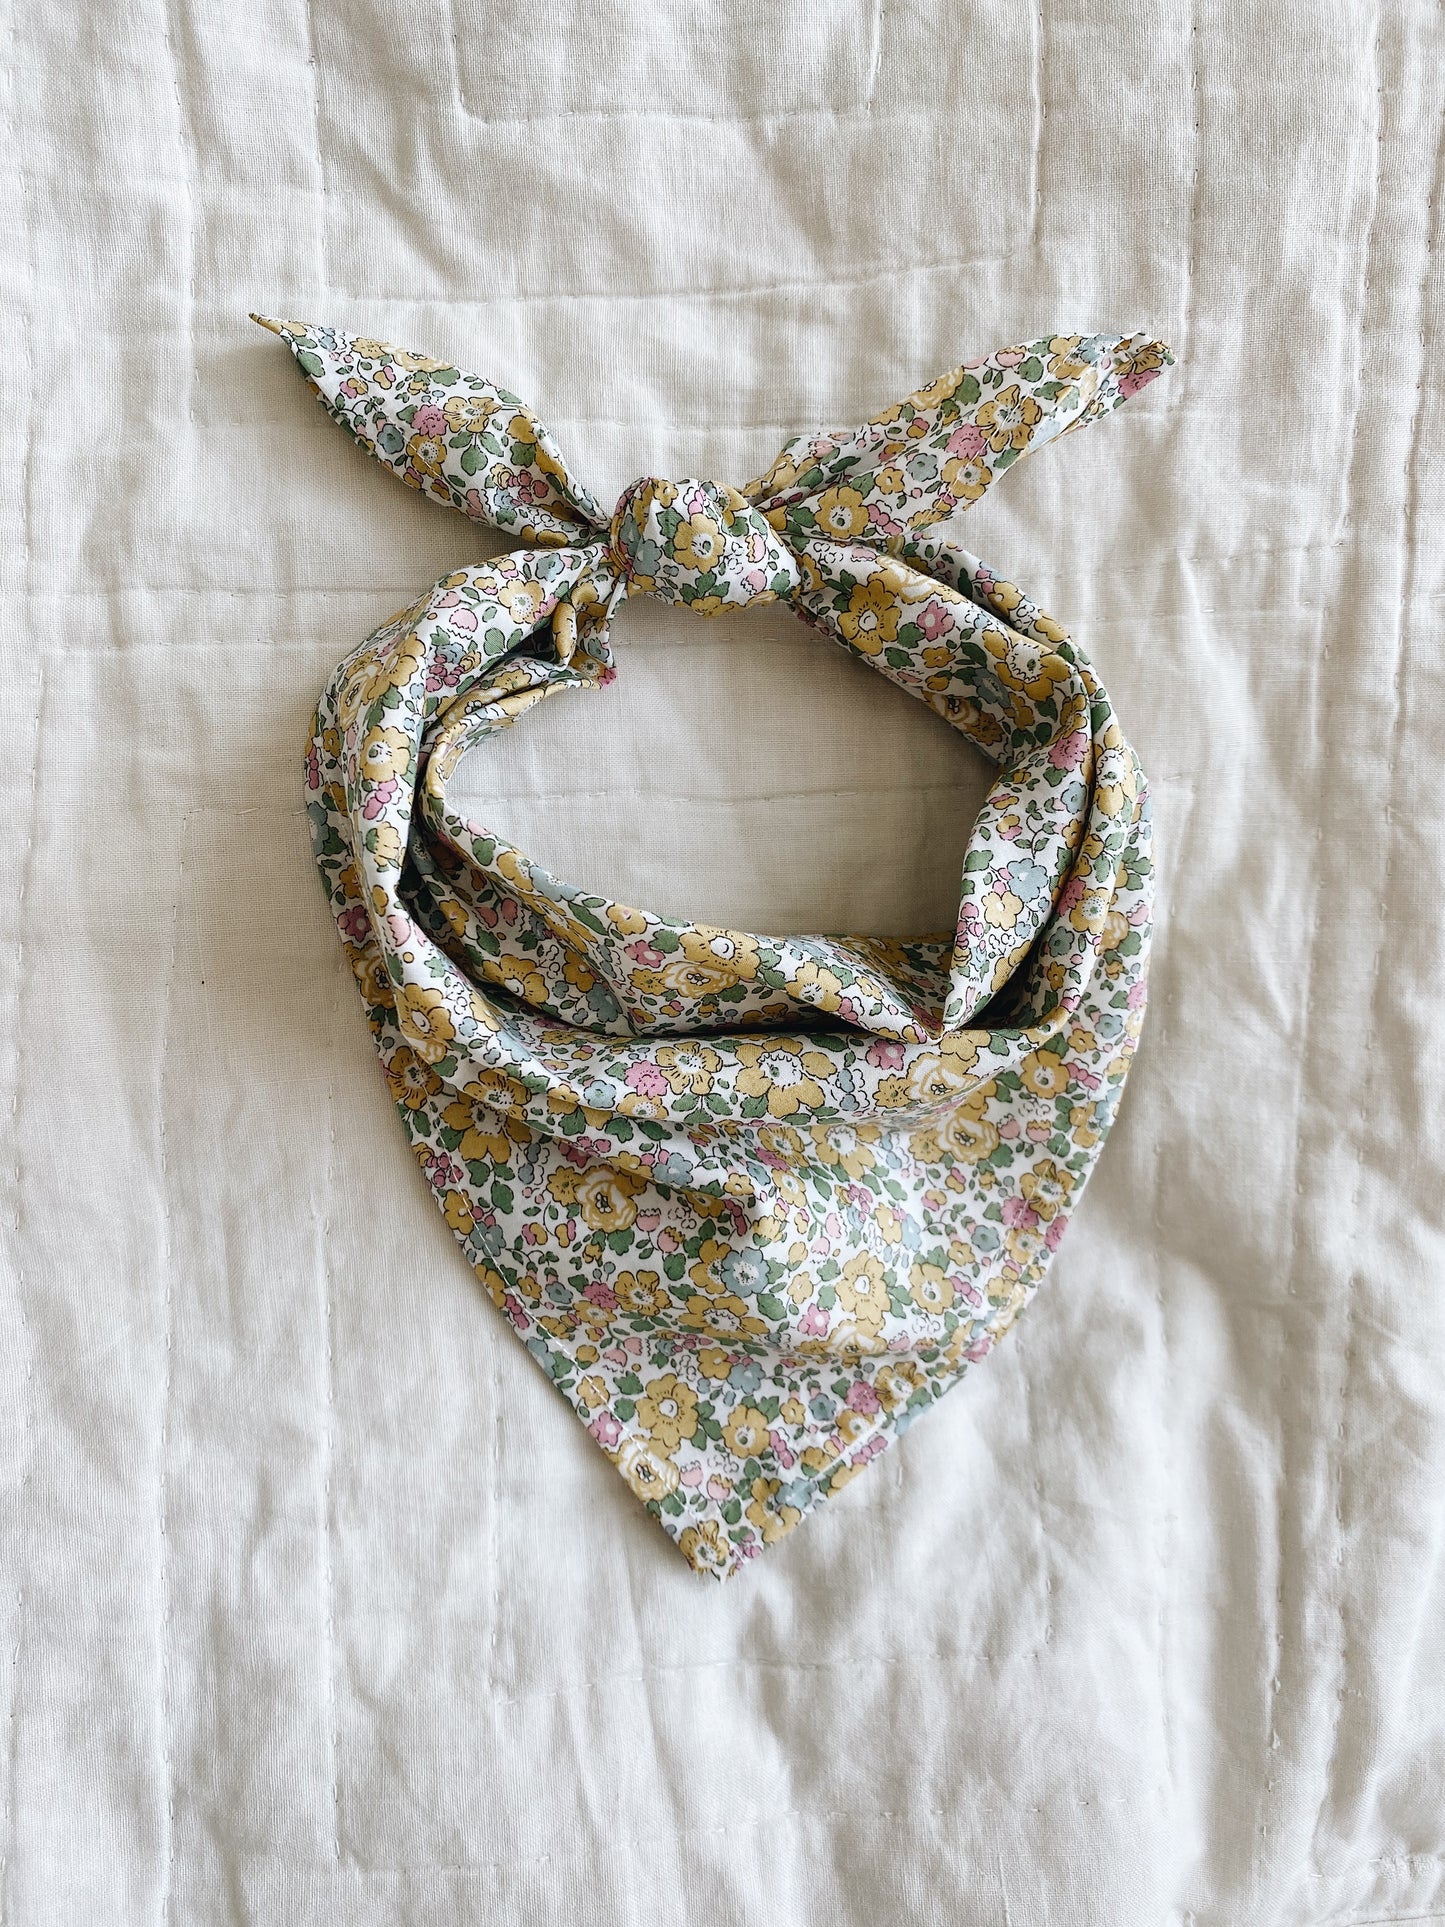 Lalaby - Eddie scarf - Liberty betsy ann